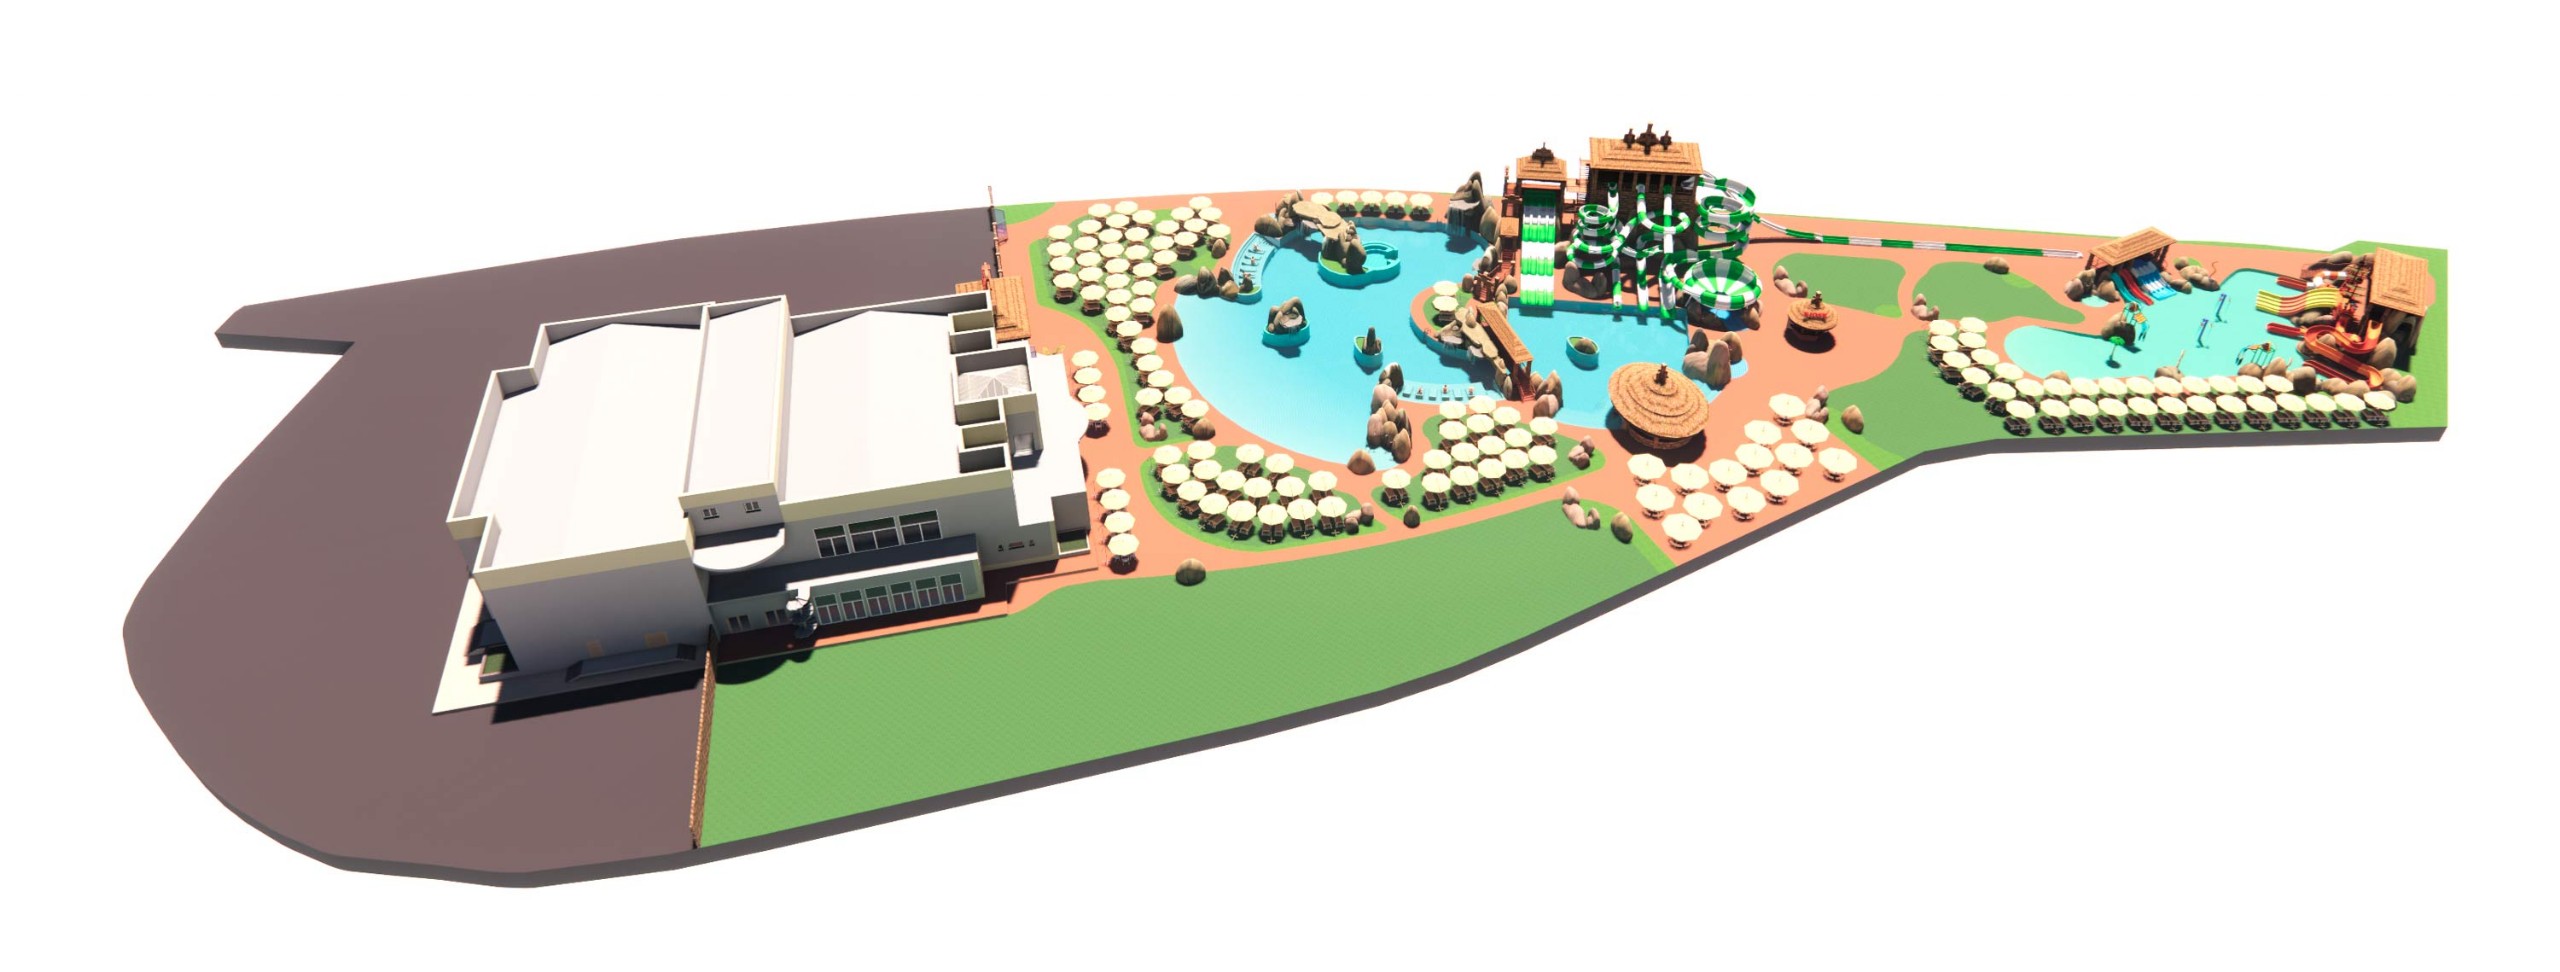 10.500 M2 WATER PARK